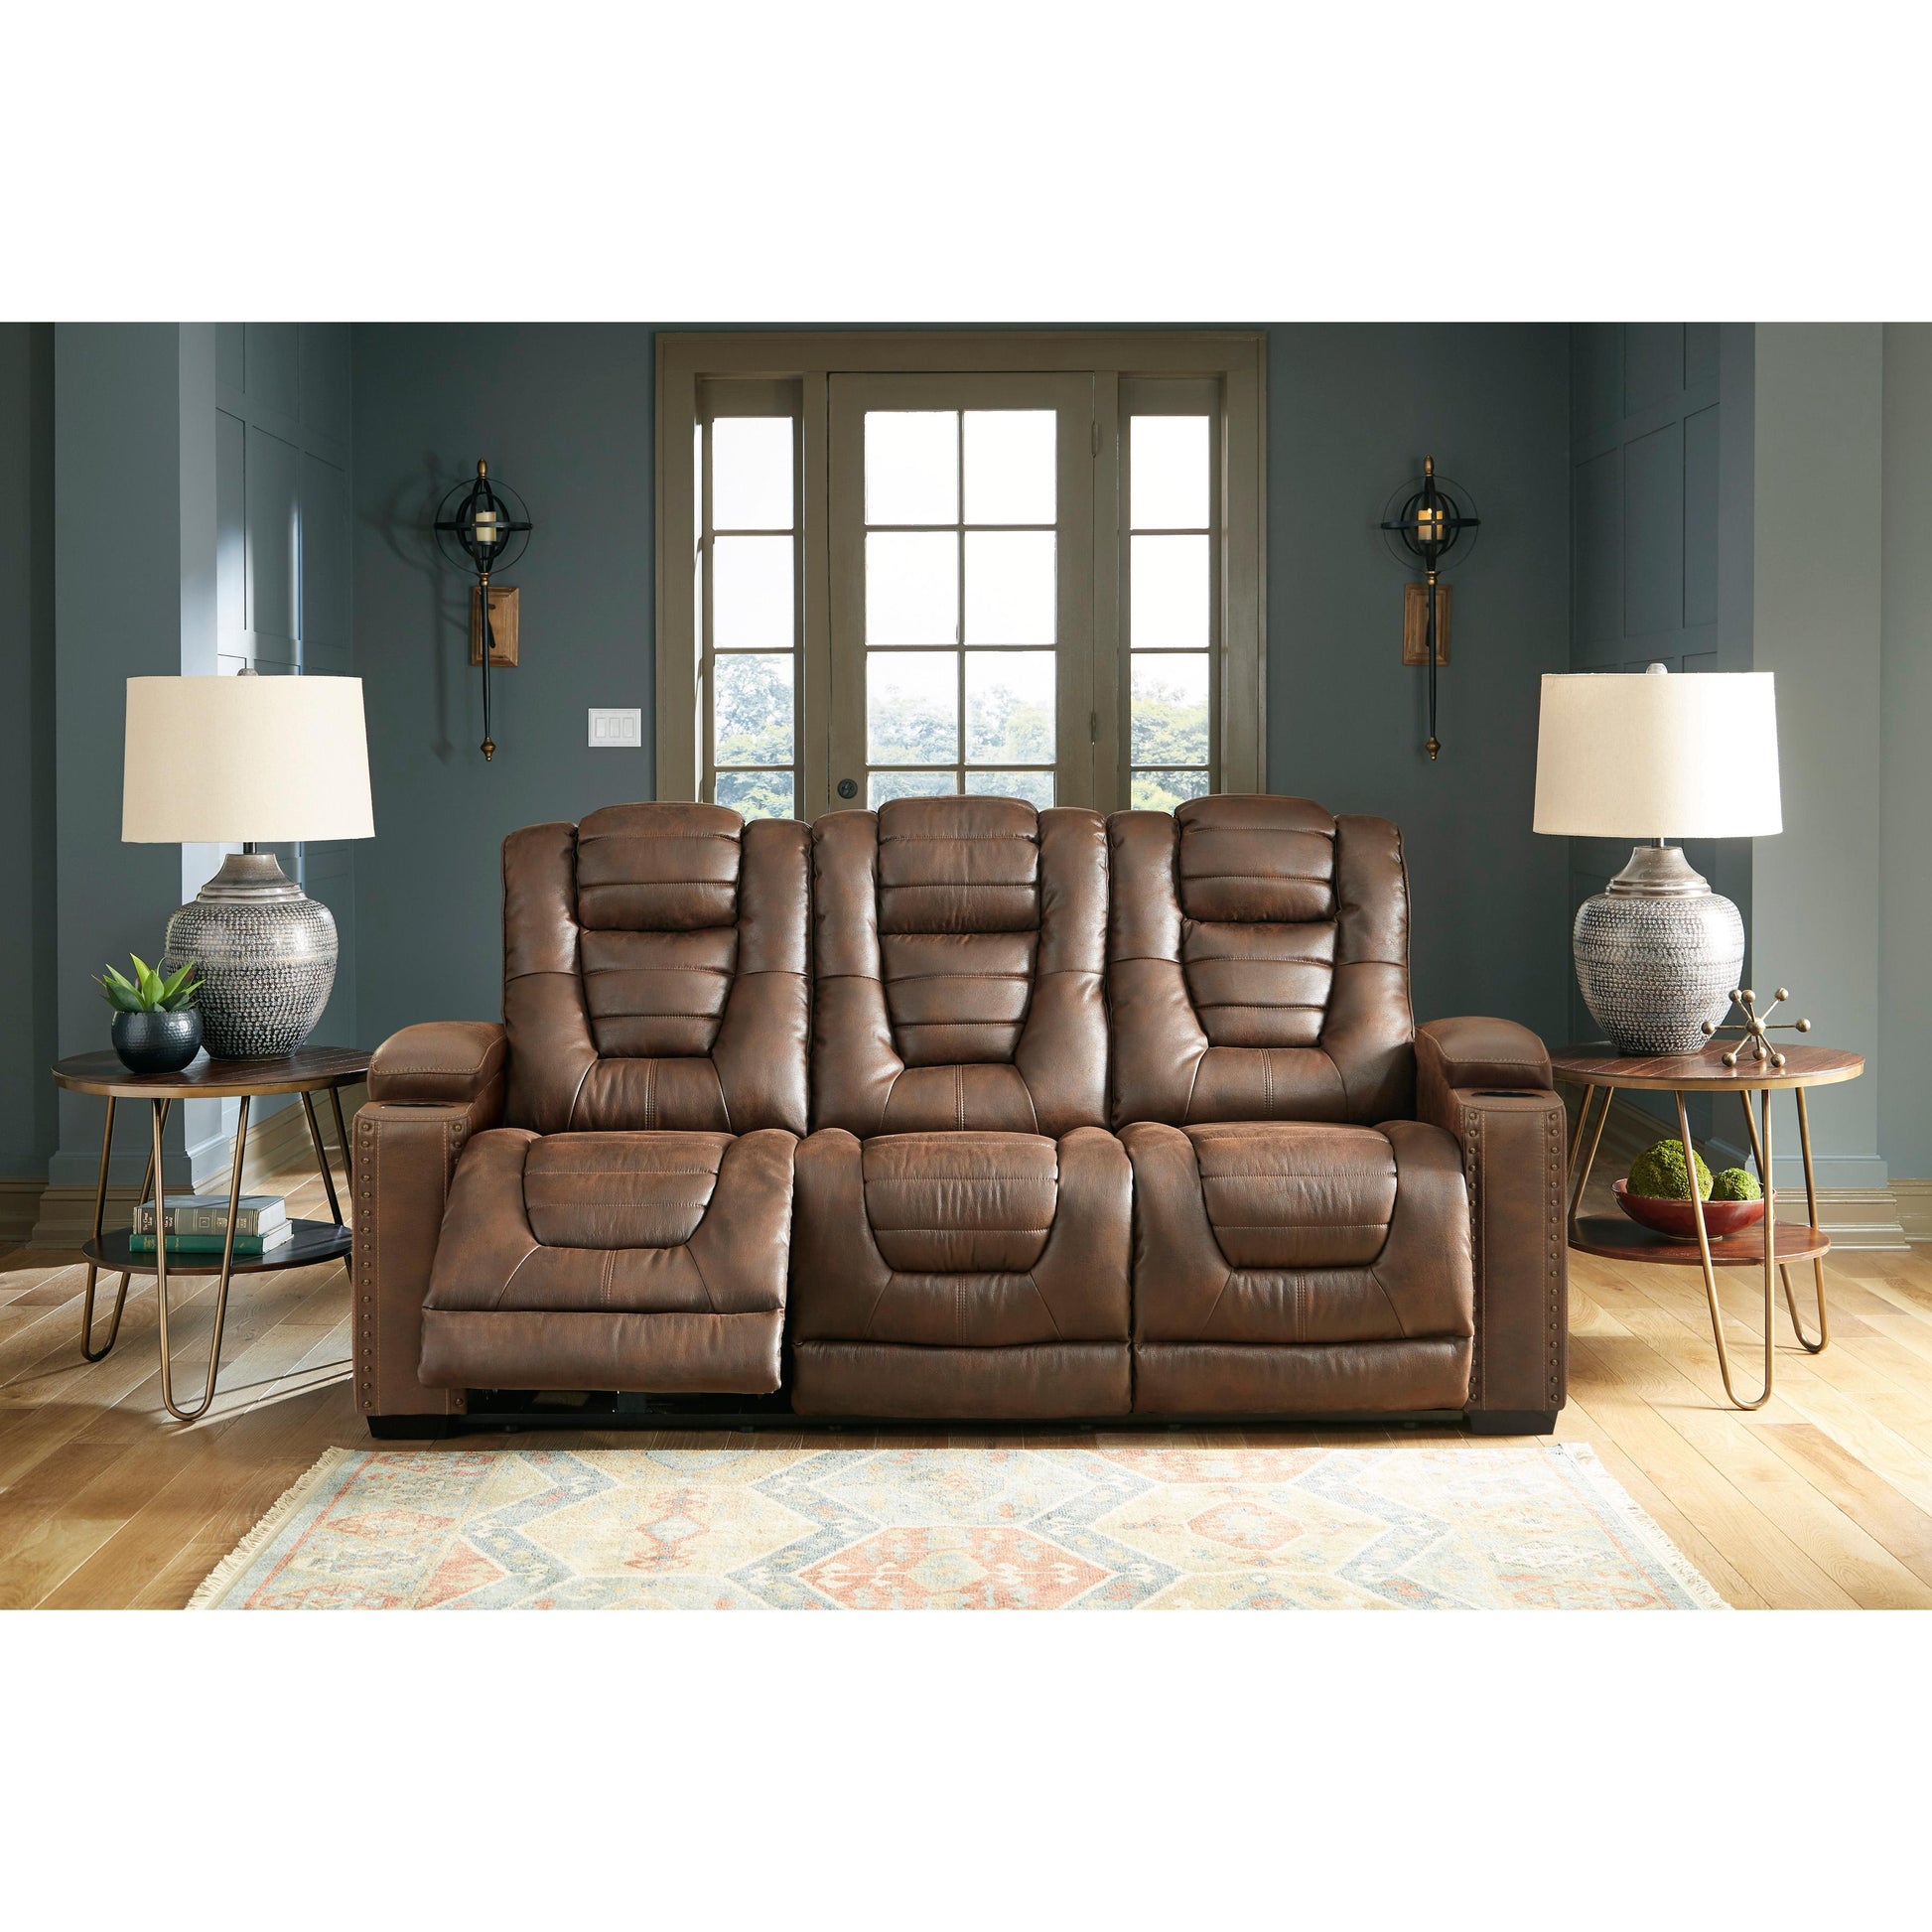 Signature Design by Ashley Owner's Box 24505U3 2 pc Power Reclining Living Room Set IMAGE 2